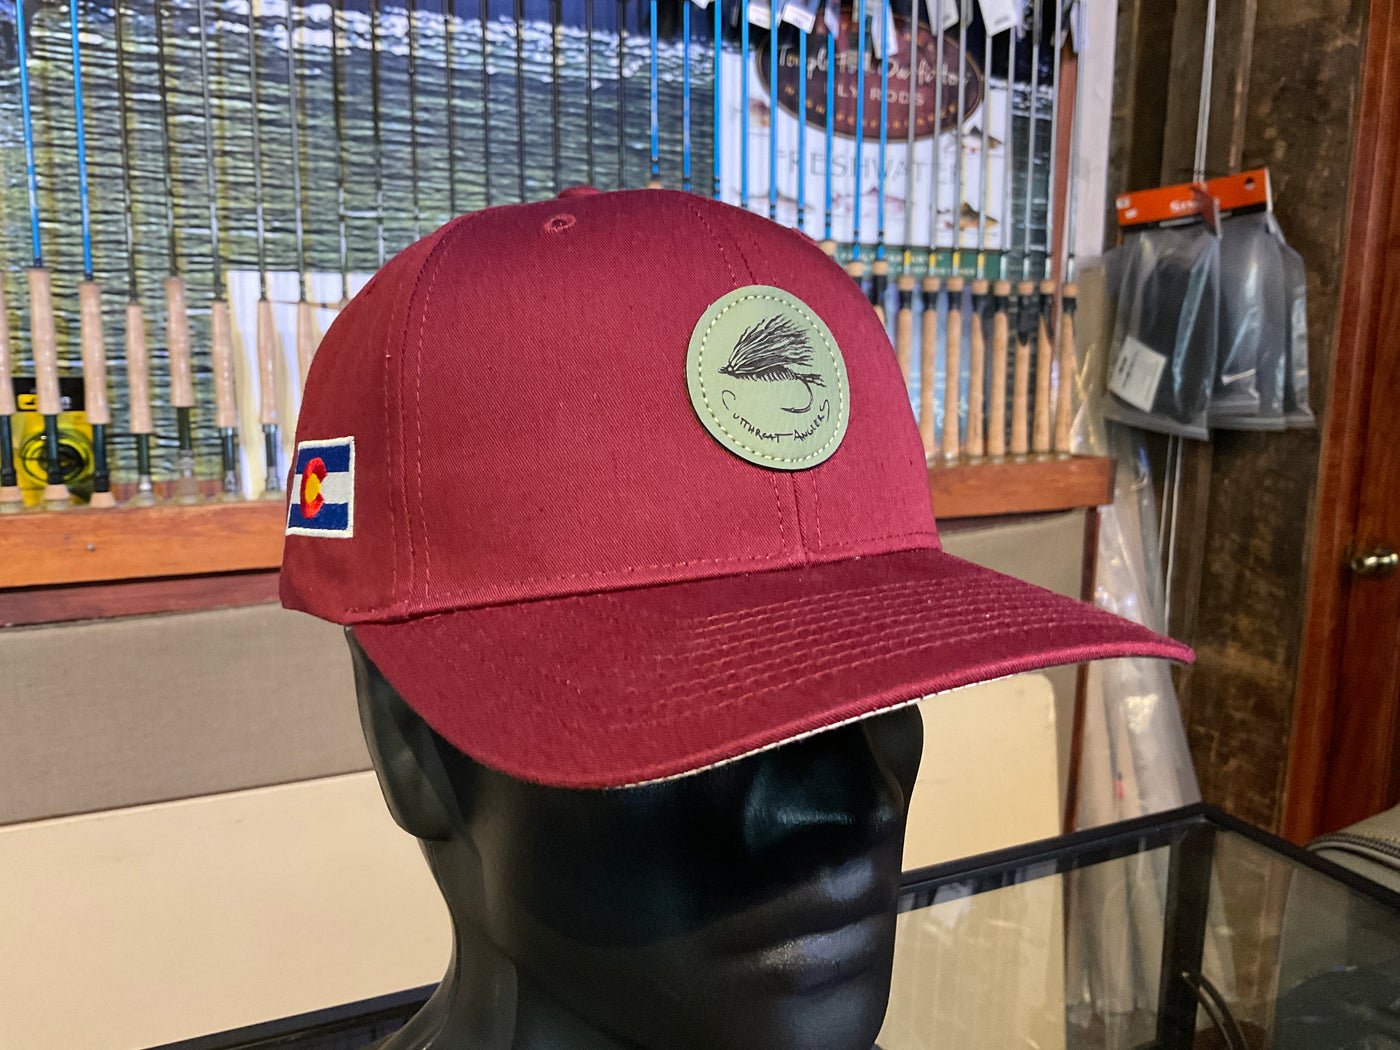 Jacob Lutz Richardson Pro 212 "Drying Out" Leather Patch Hat